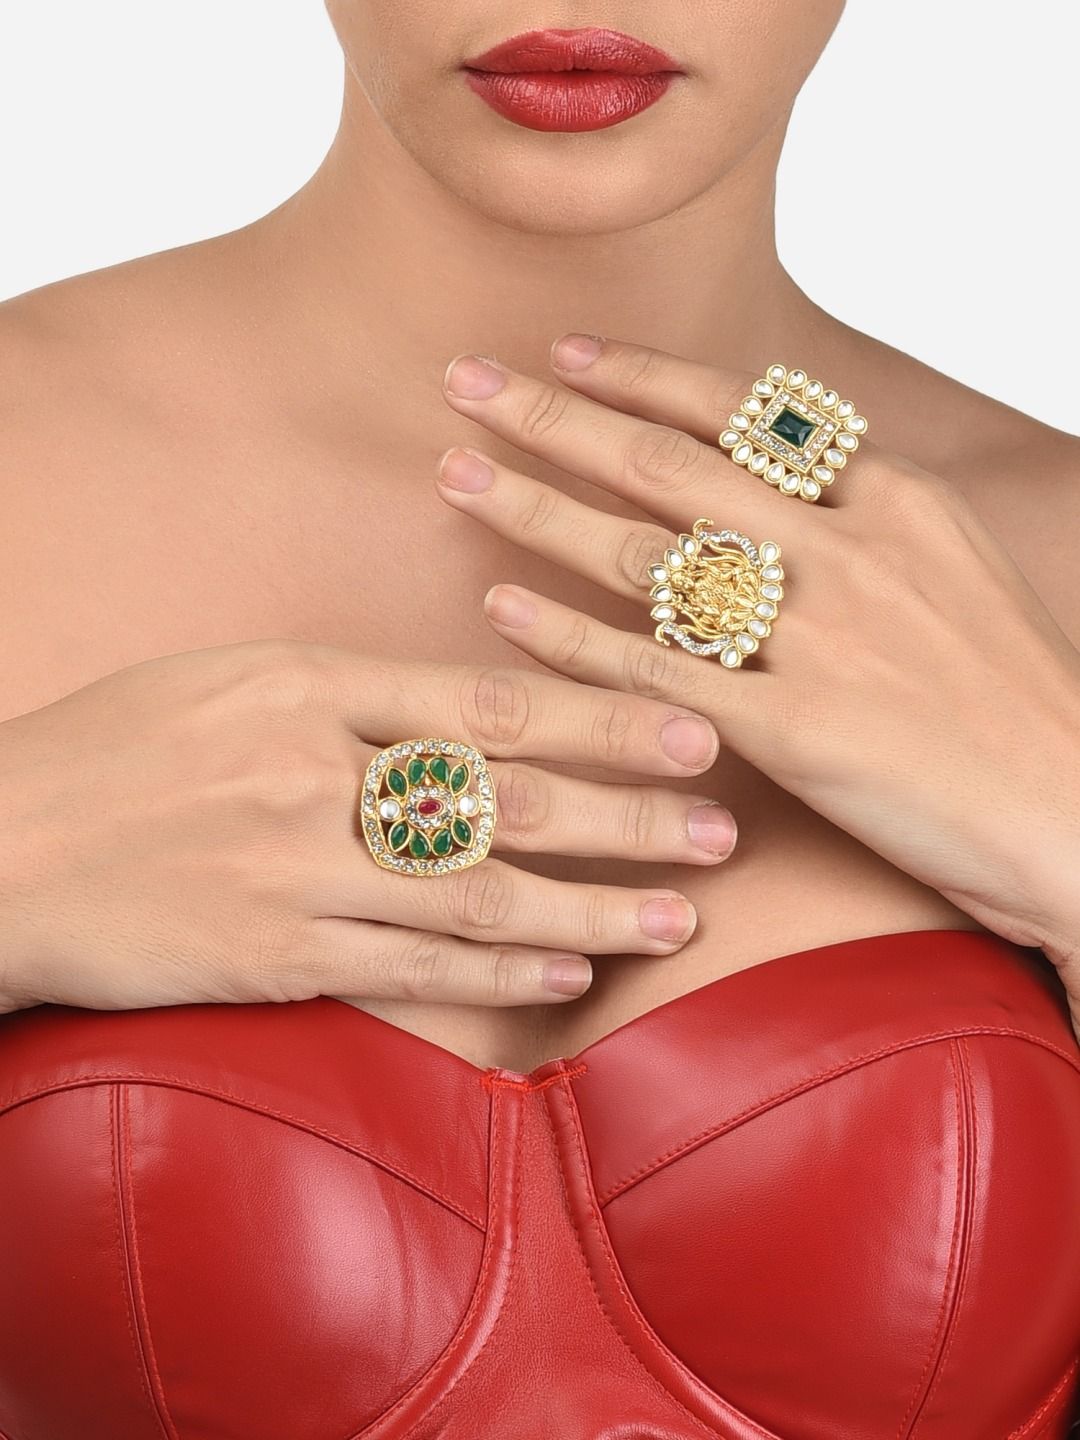 Zaveri Pearls Set Of 3 Gold-Plated Multicolored Stone-Studded Adjustable Finger Rings Price in India